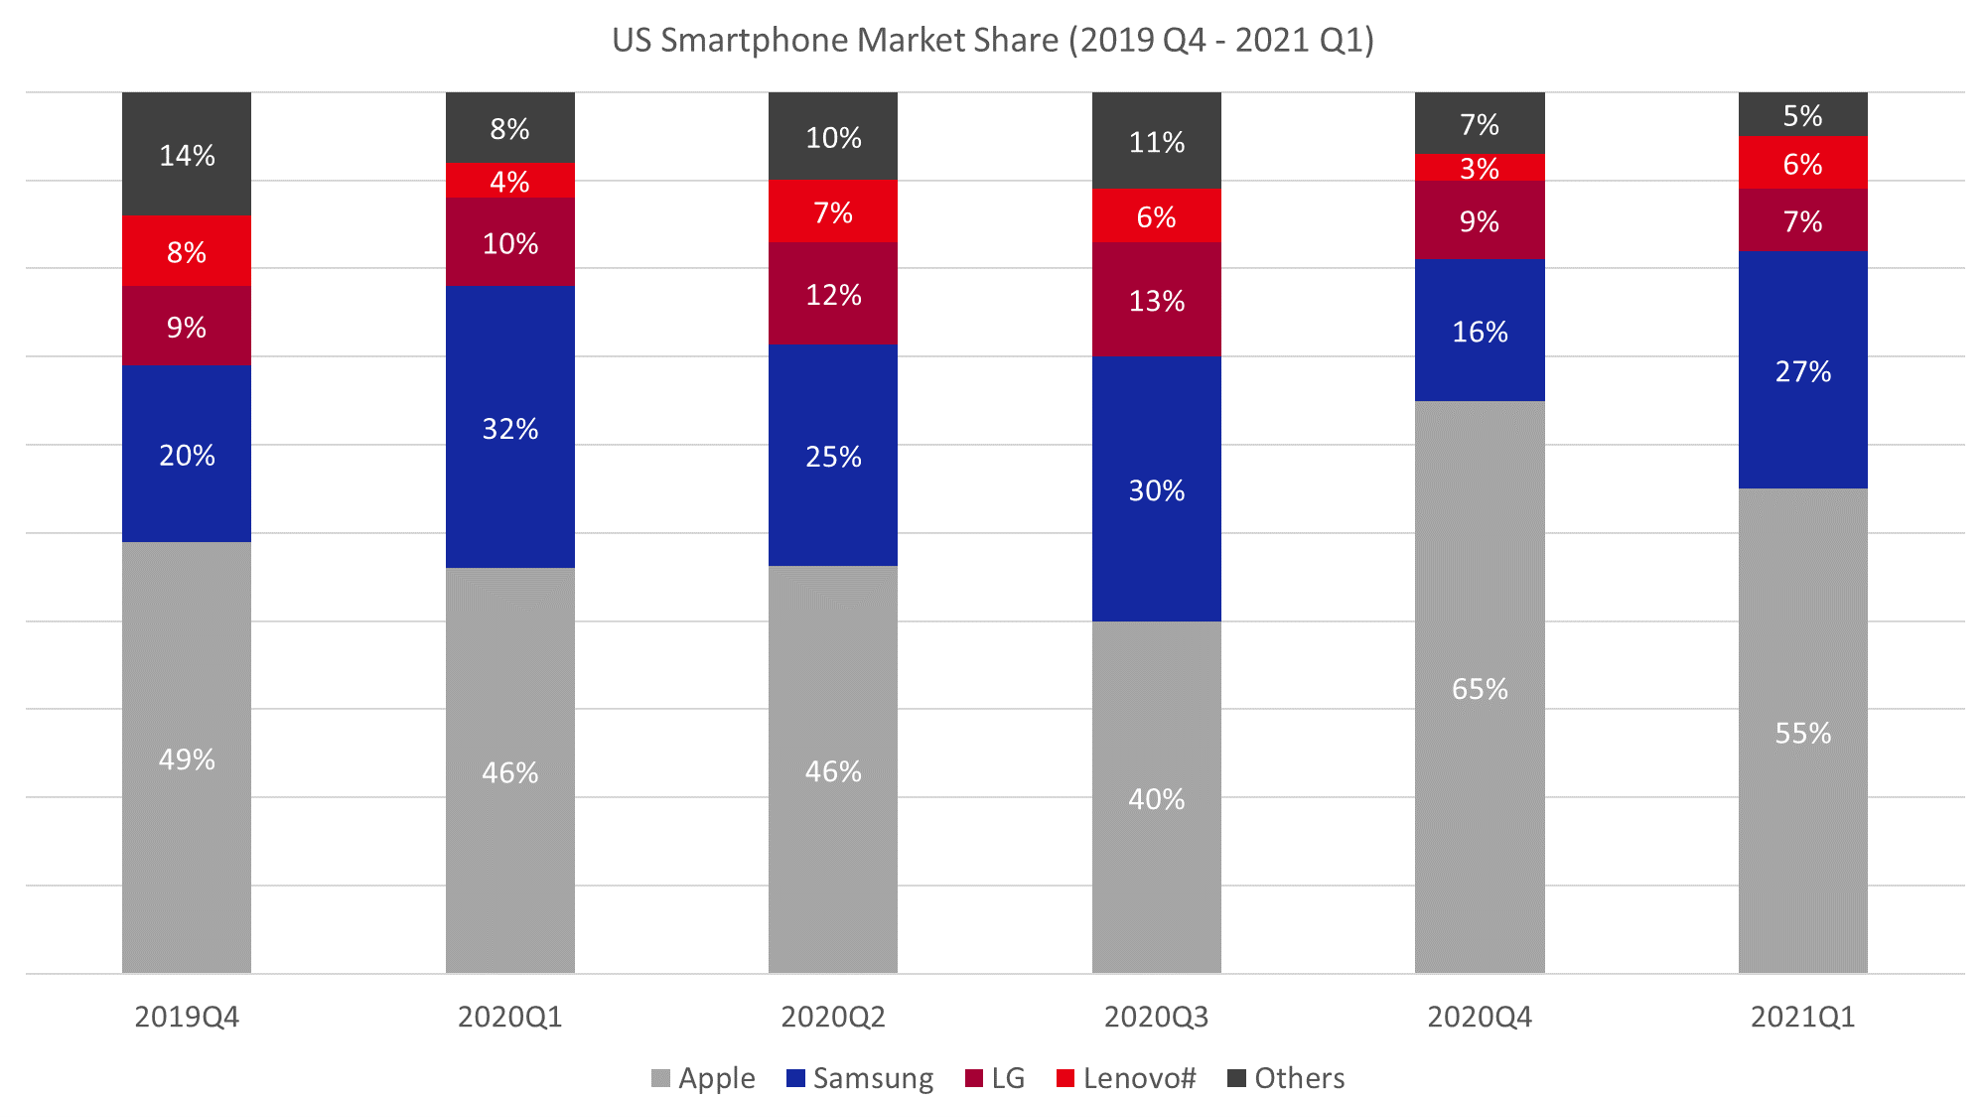 Counterpoint-Research-US-Smartphone-Quarterly-Market-Data-2019Q4-2021Q1-2 (1).png